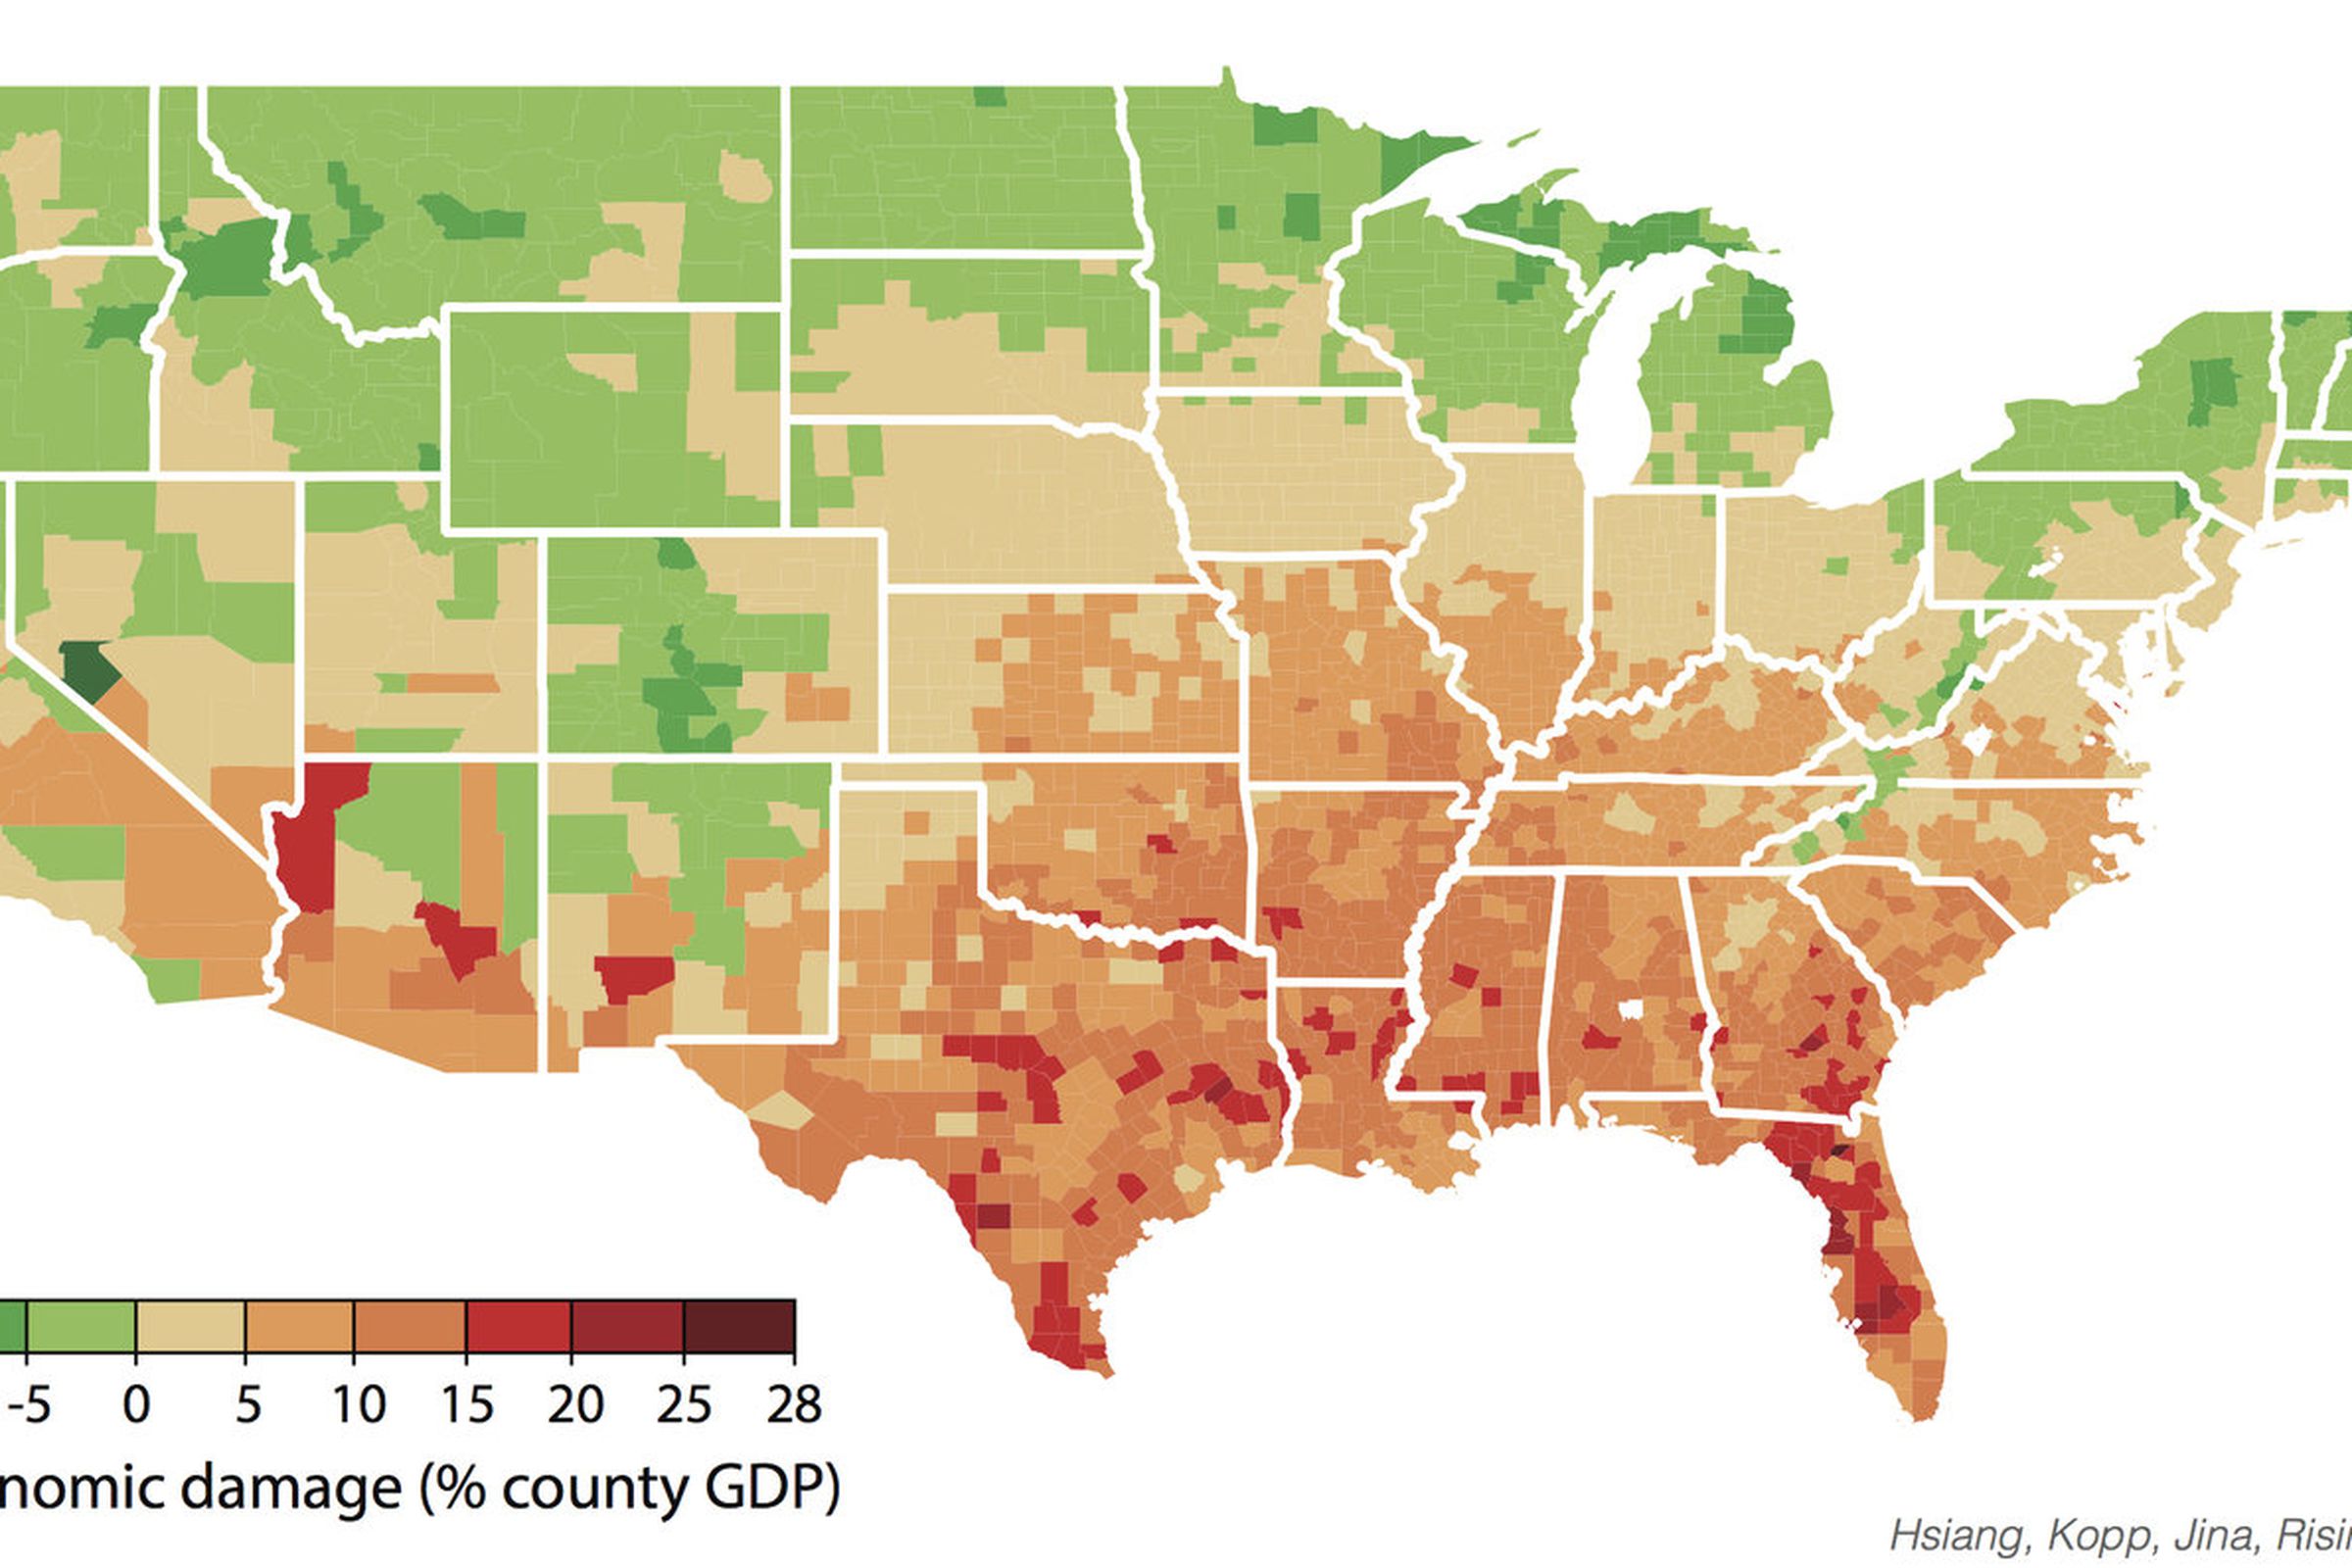 County-level annual damages by climate change during 2080-2099 under business-as-usual emissions trajectory.